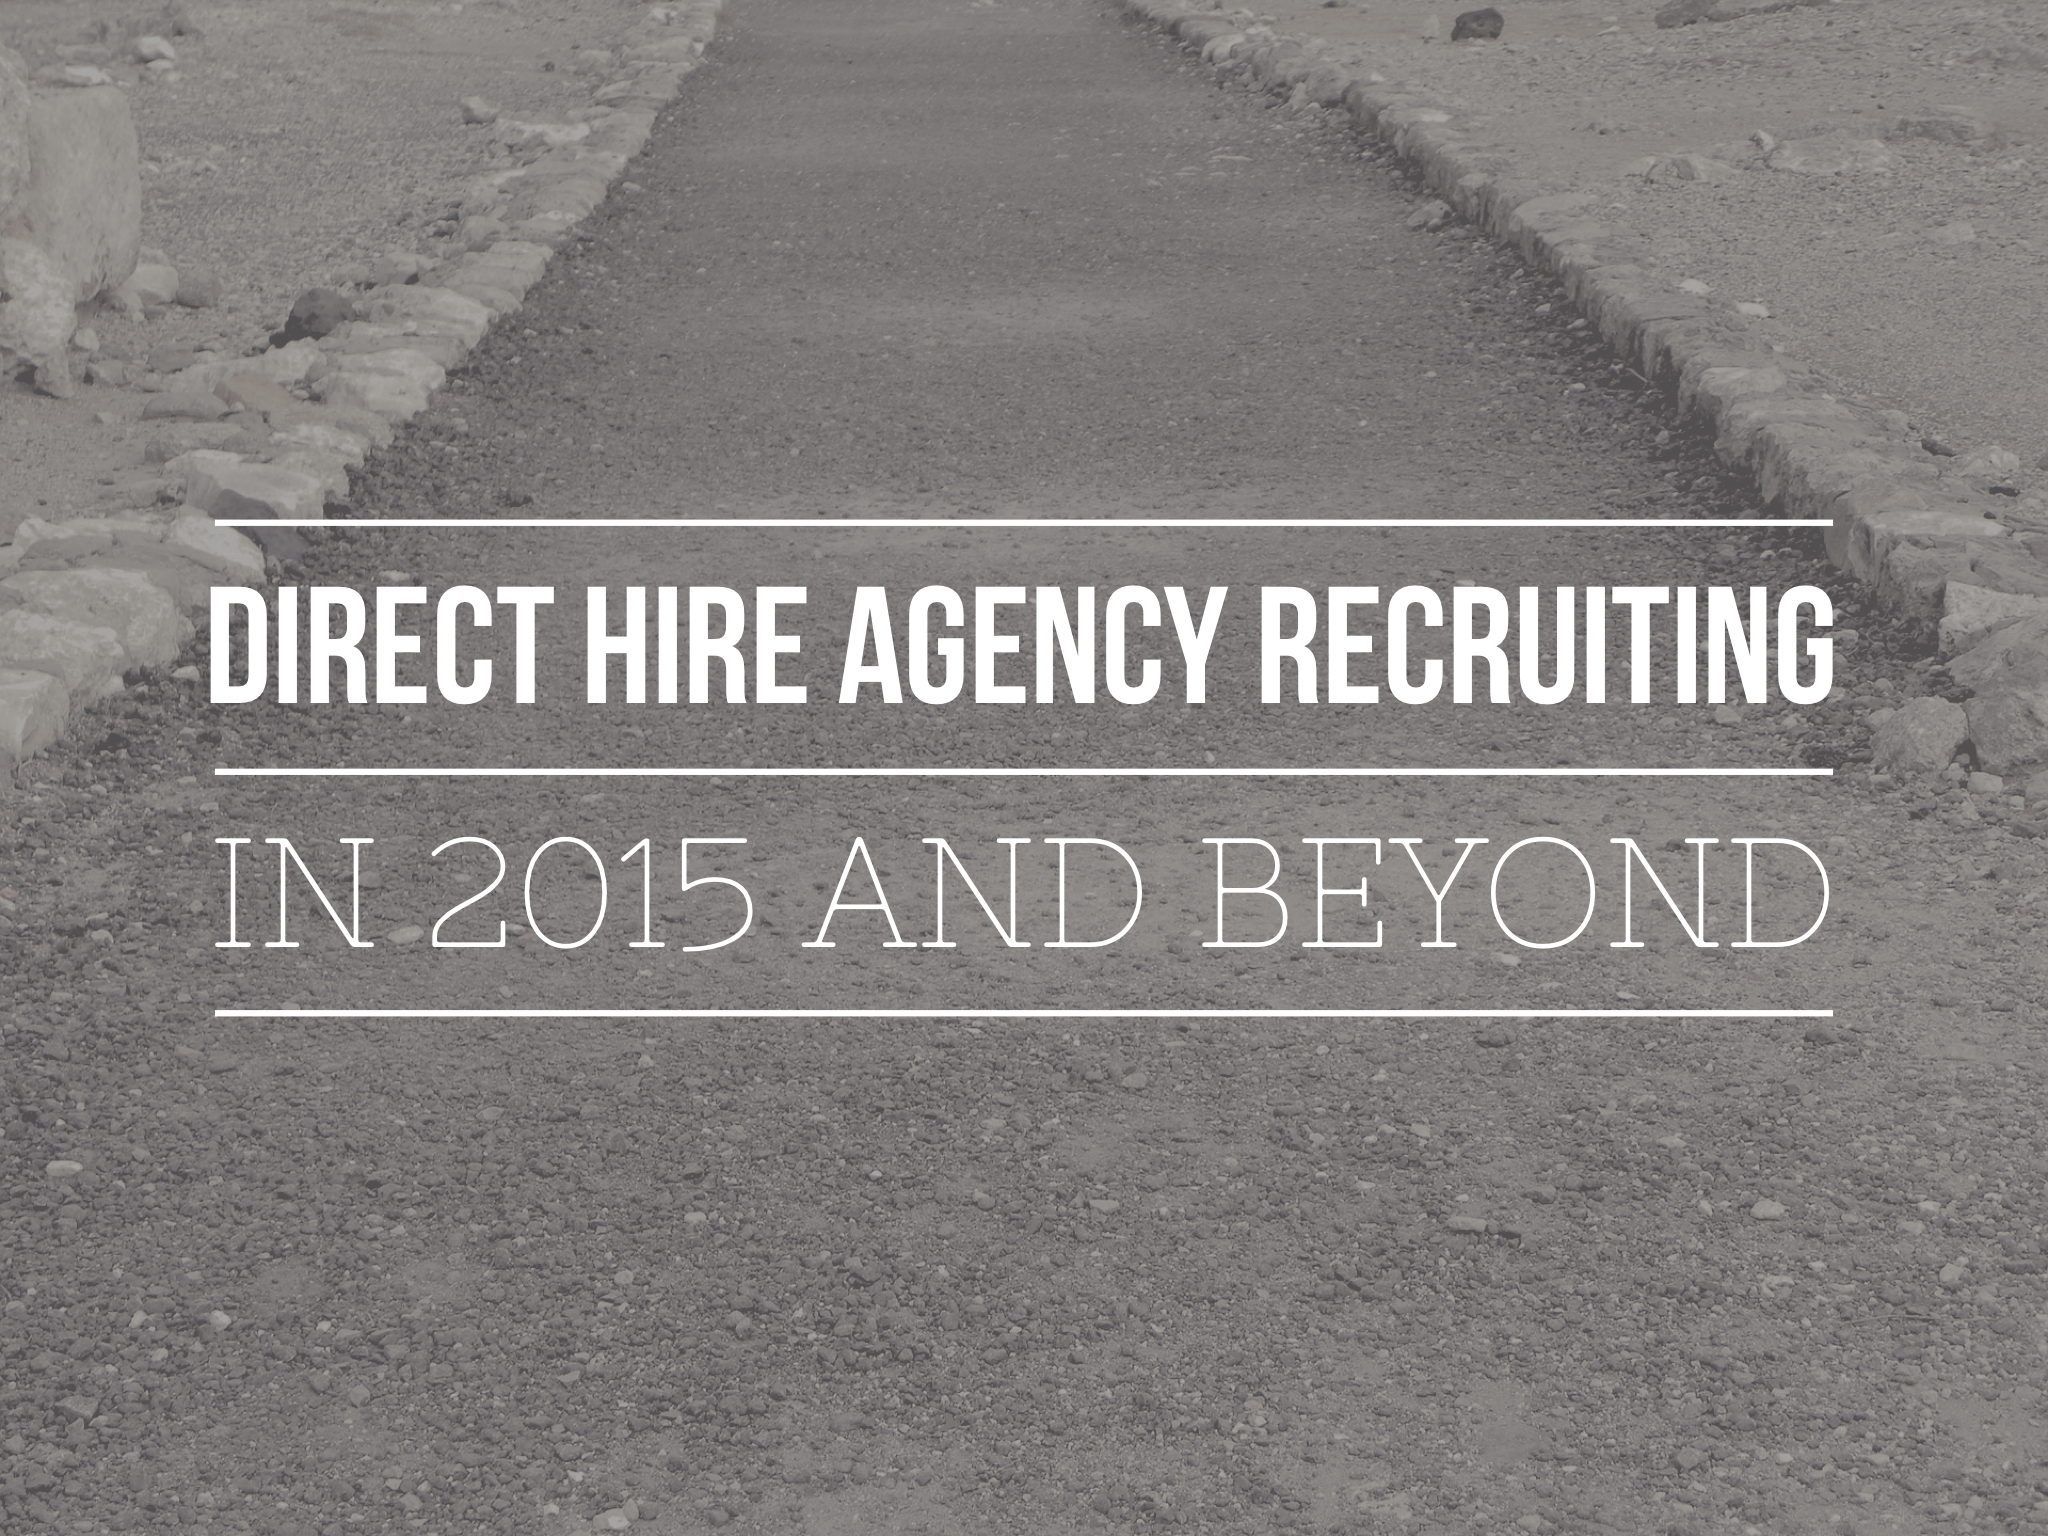 Direct Hire Agency Recruiting in 2015 and Beyond